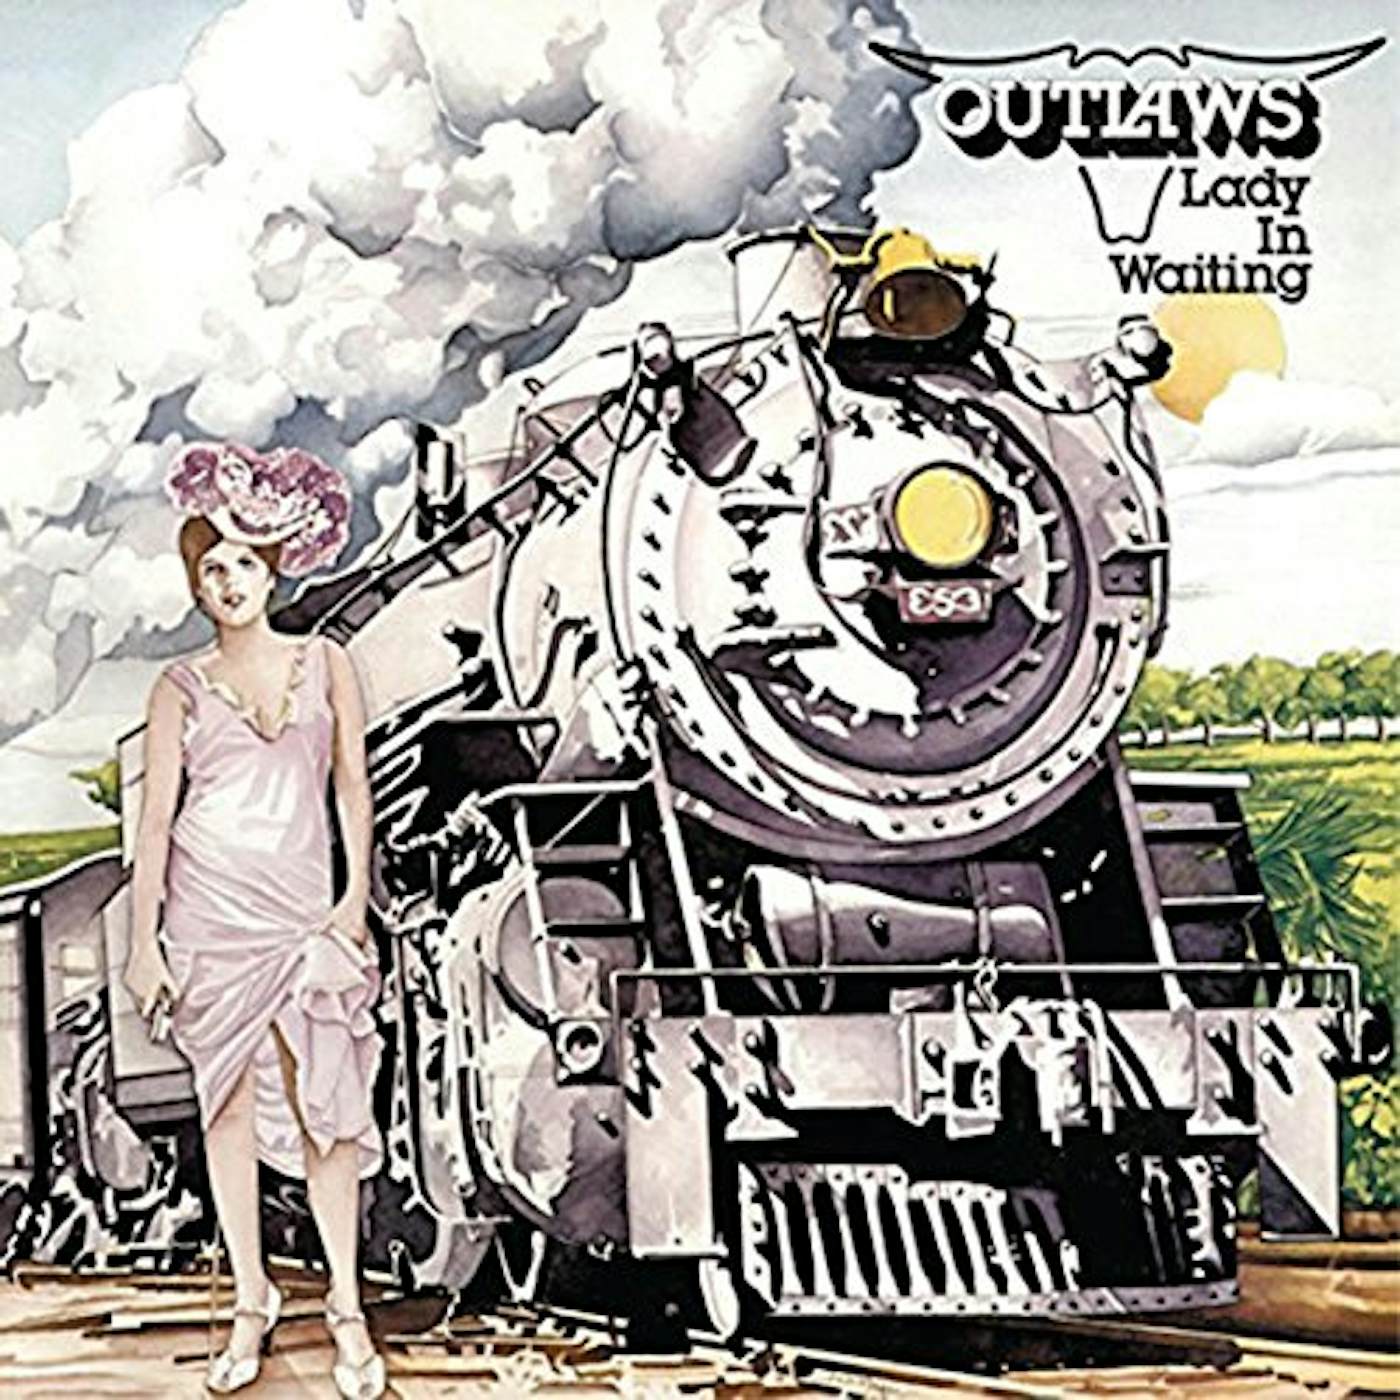 Outlaws LADY IN WAITING CD